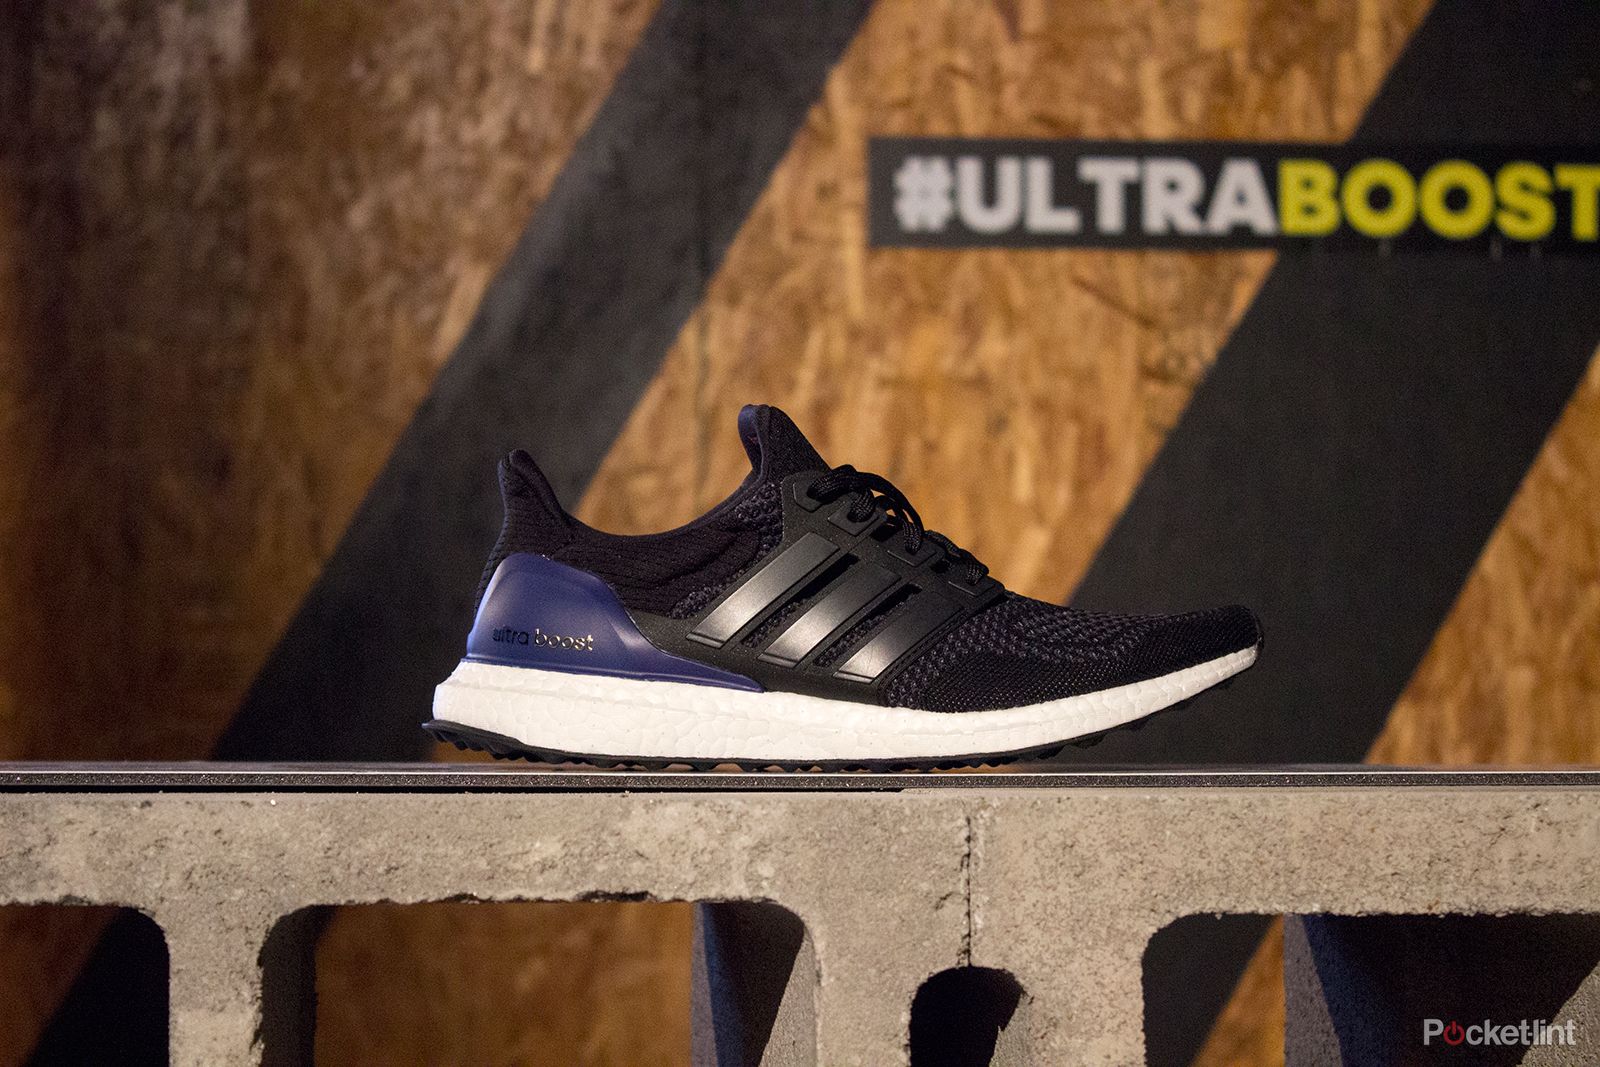 Adidas Ultra Boost claimed to be best running shoe ever: Here's why